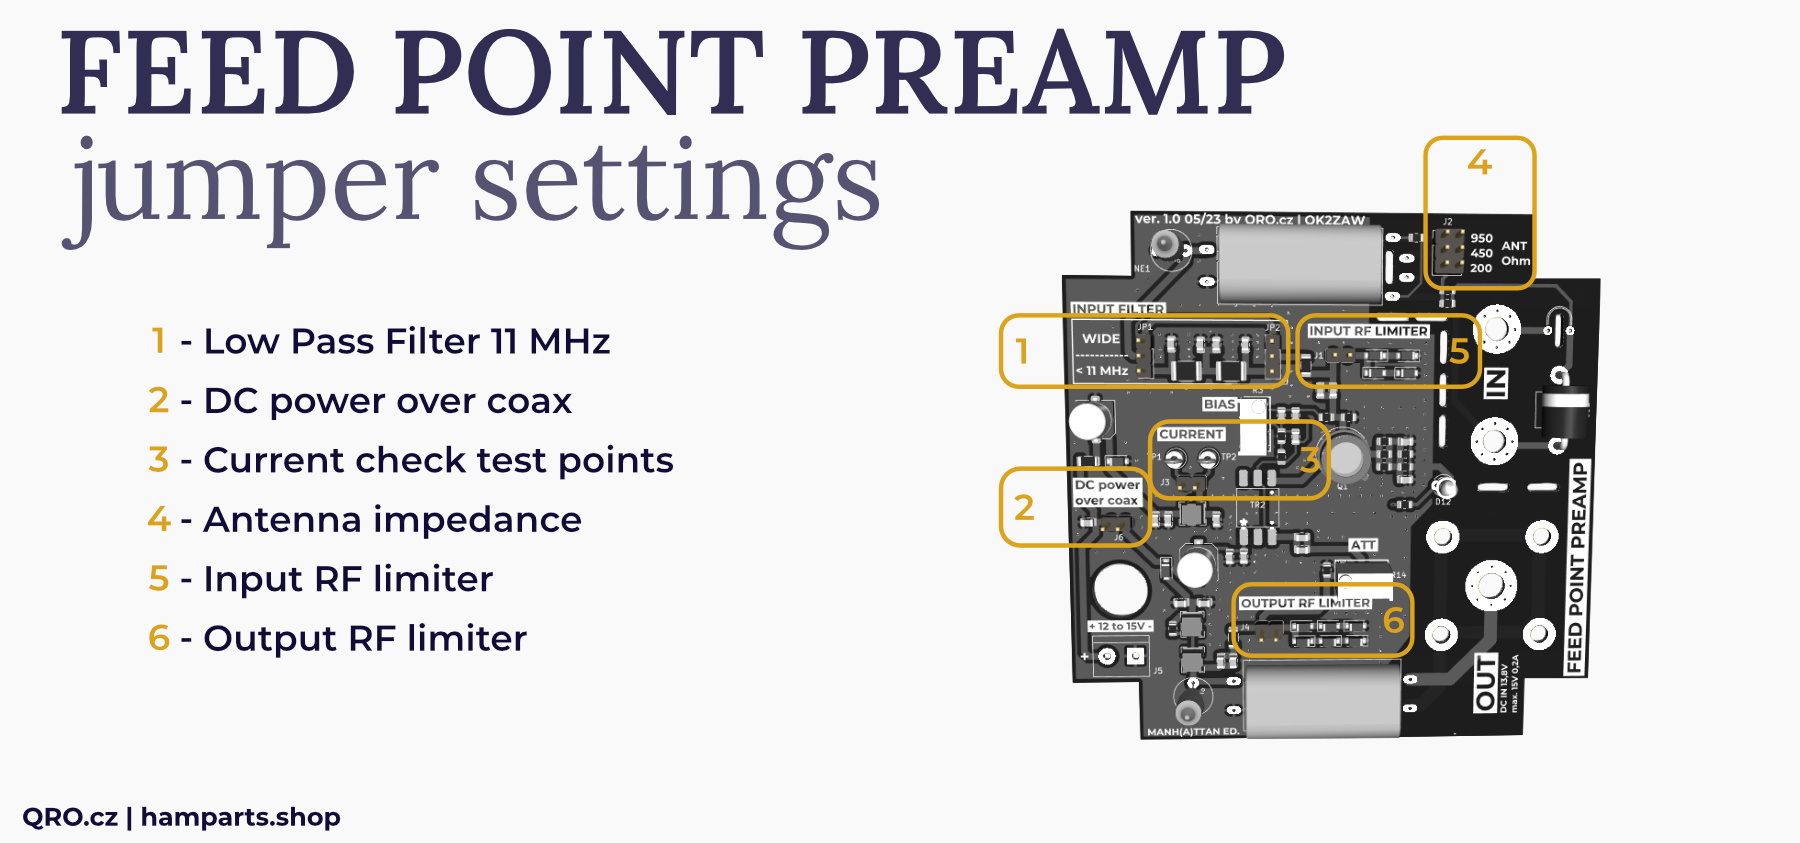 feed point preamp jumper settings by qro.cz hamparts.shop